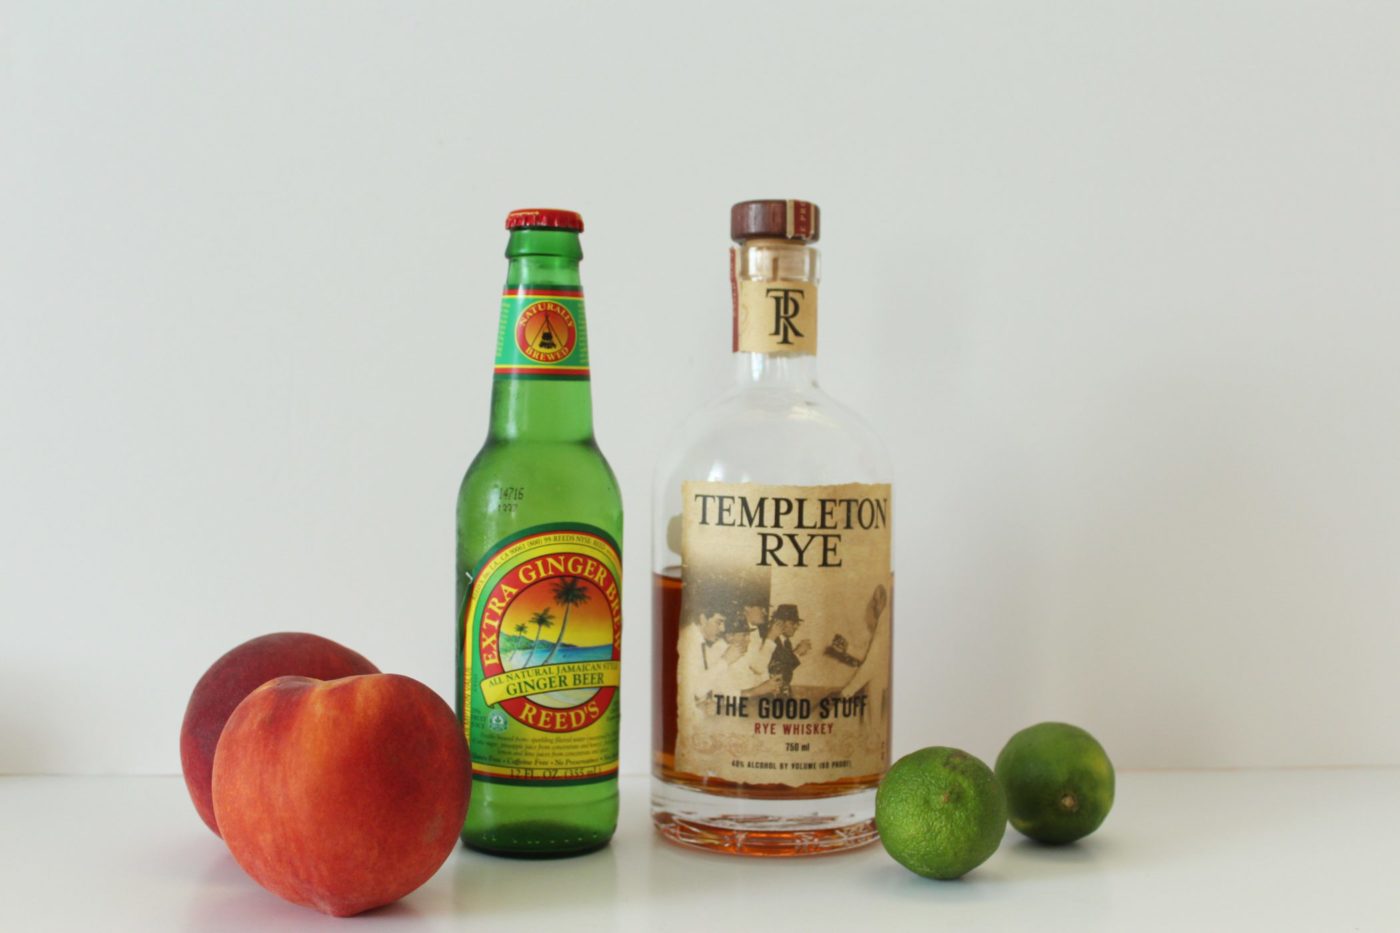 Recreating this refreshing beverage is really easy. All you'll need is whiskey, your favorite ginger beer, lime and of course fresh peaches.